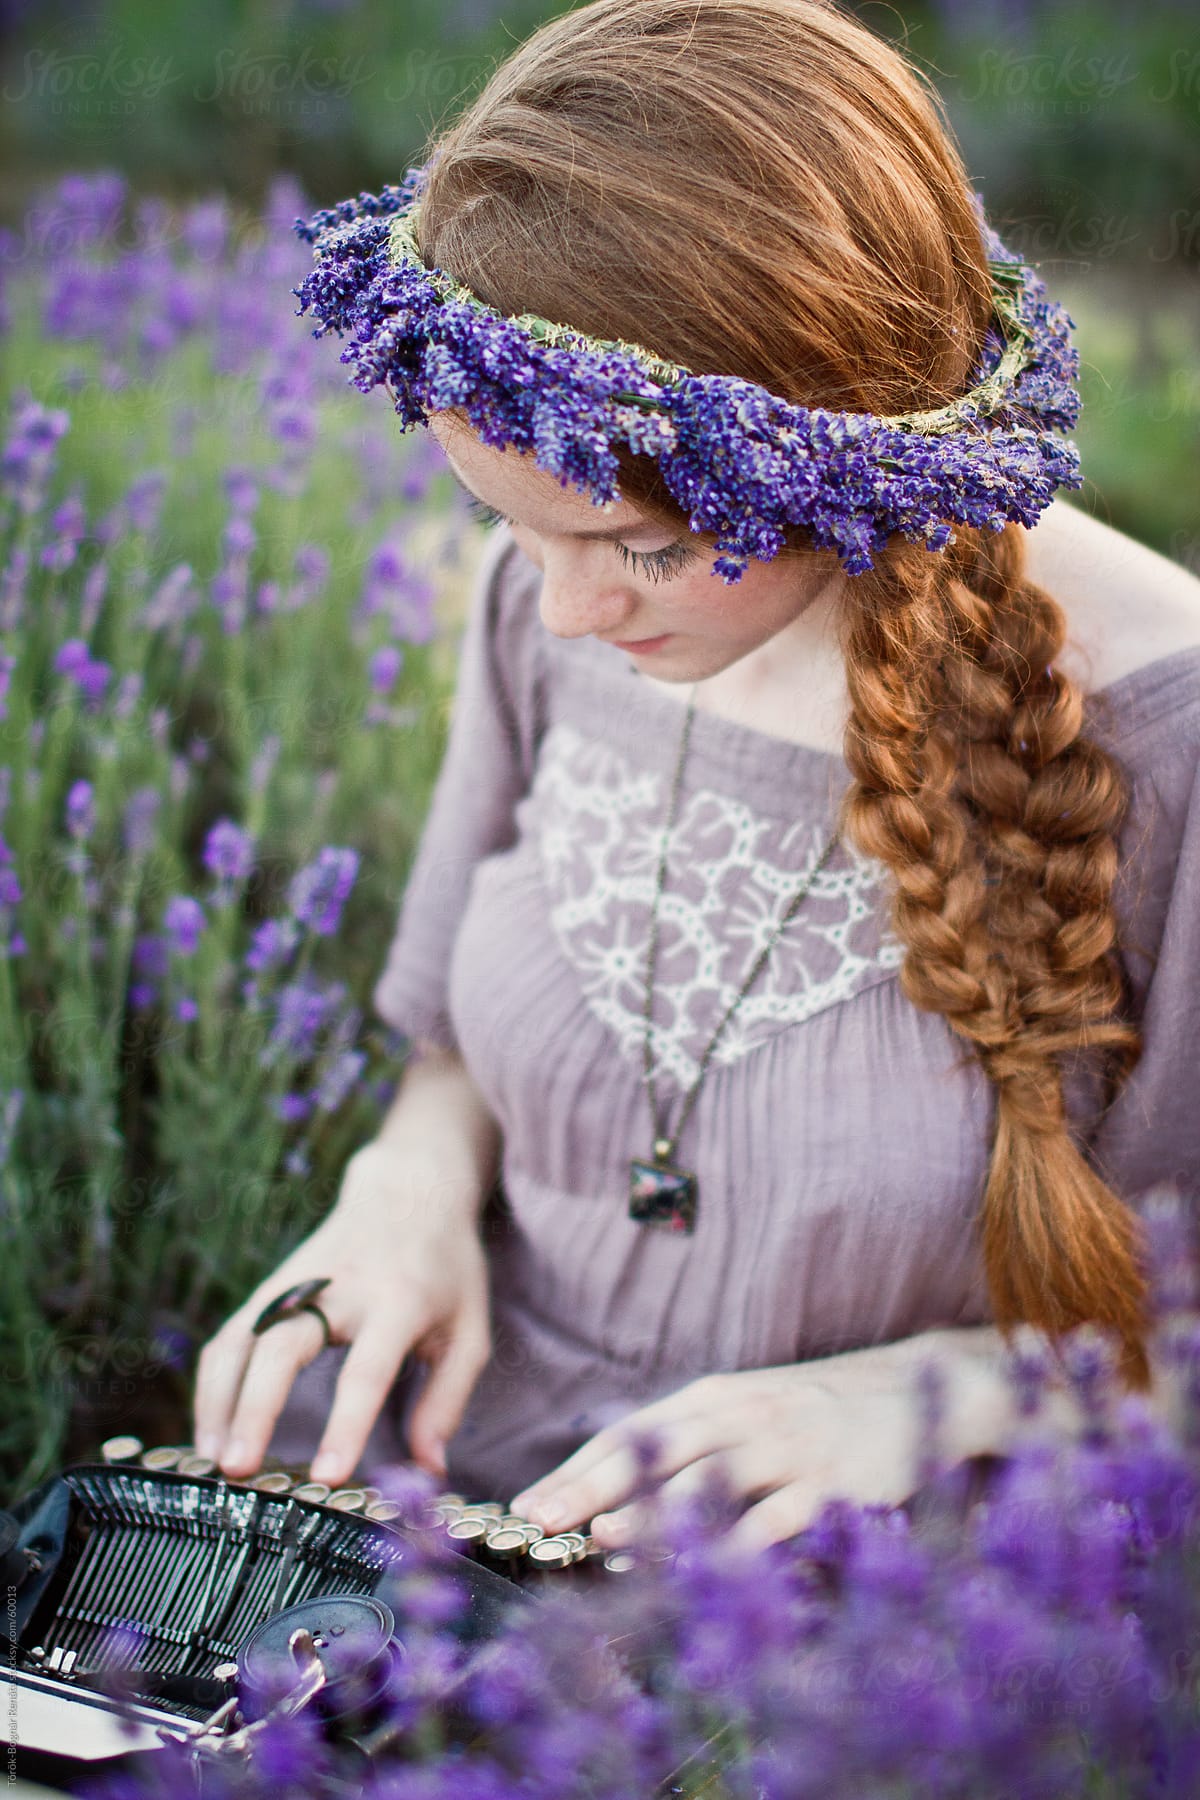 Beautiful redhaid young woman in the lavender field with a vintage typewriter